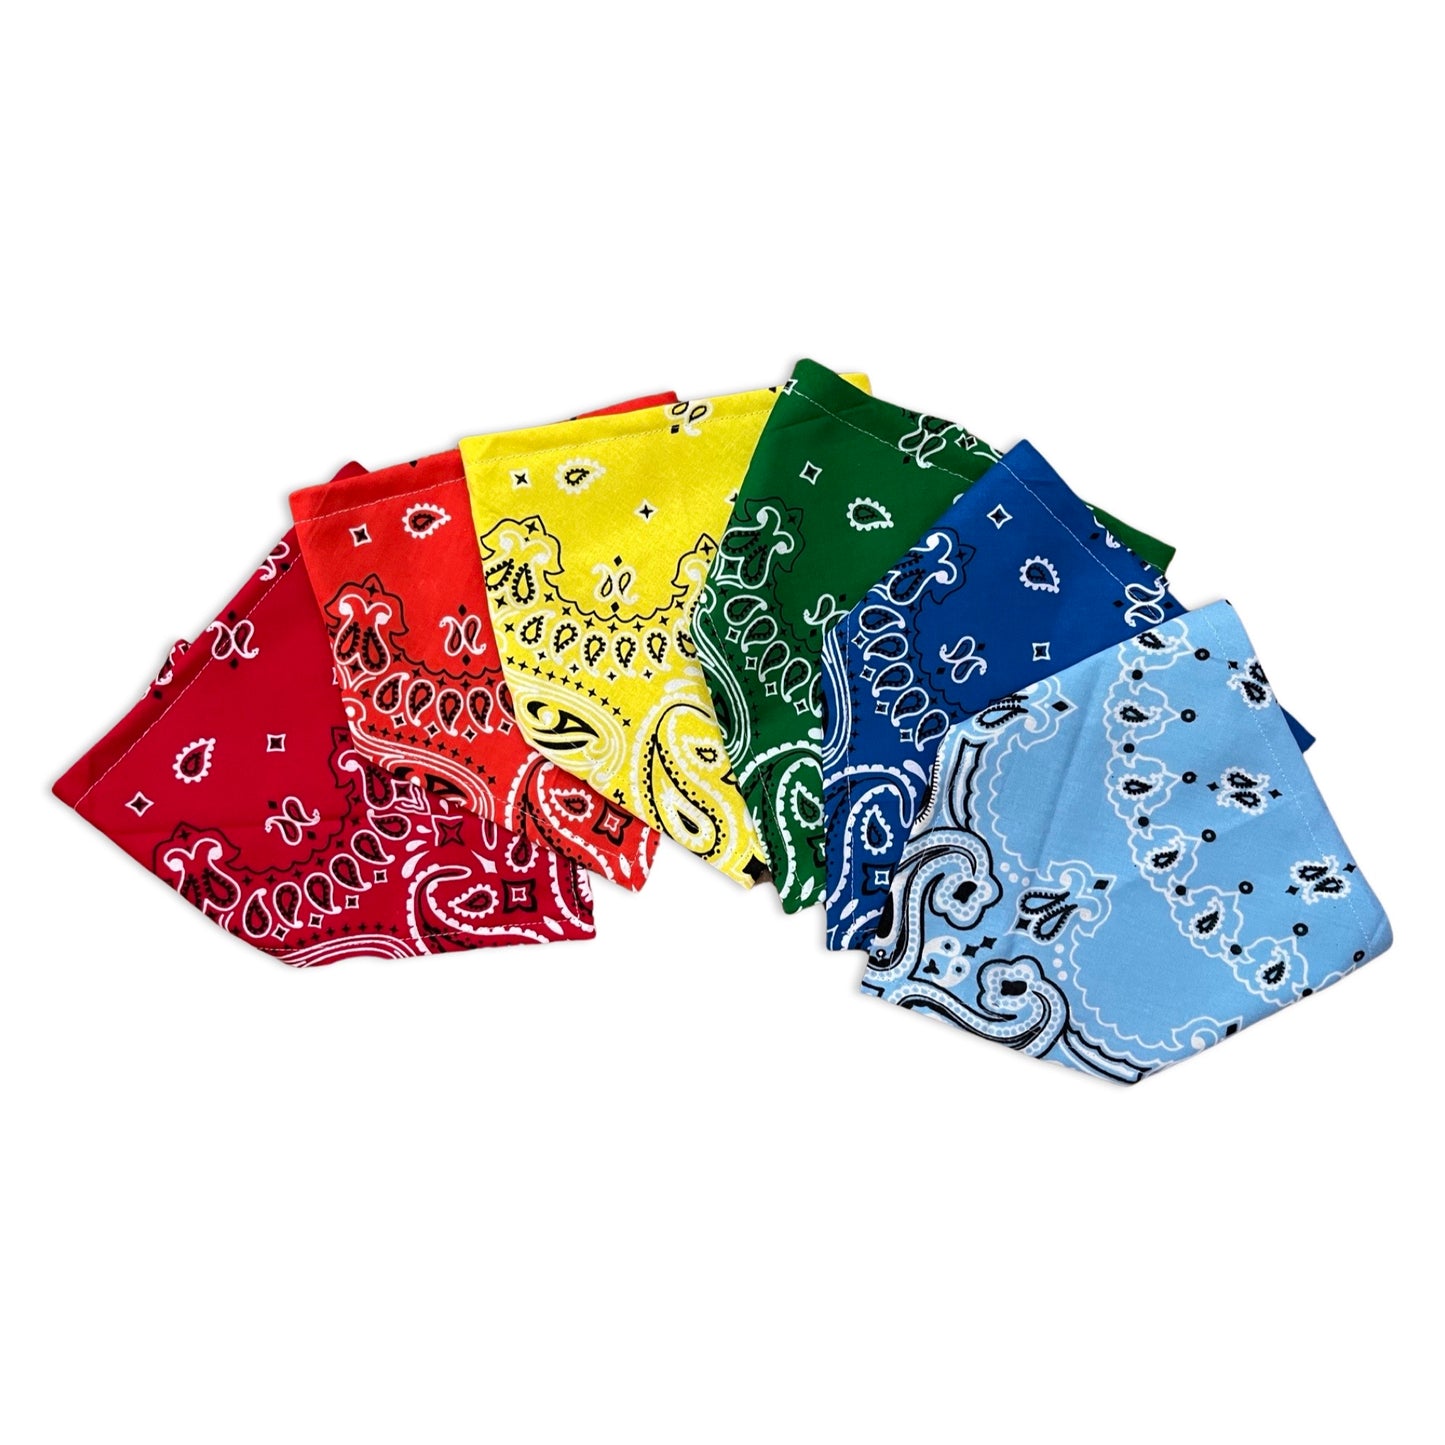 Bandana Bib for Baby - Available in 10 colors